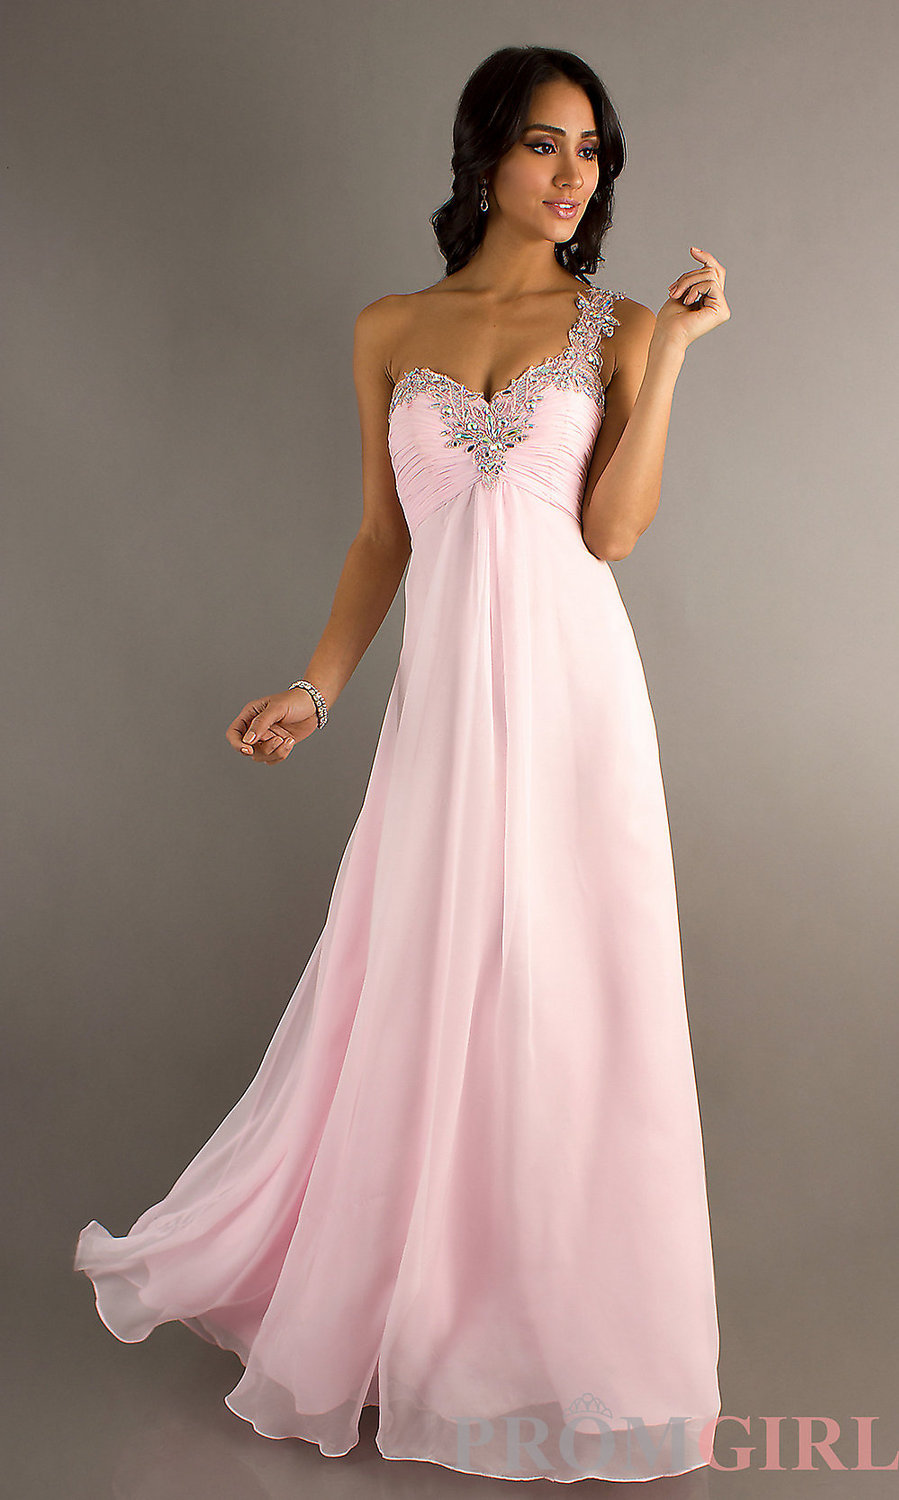 ... -Sparkly-Crystals-Beads-One-Shoulder-Girls-Prom-Dresses-Cheap.jpg